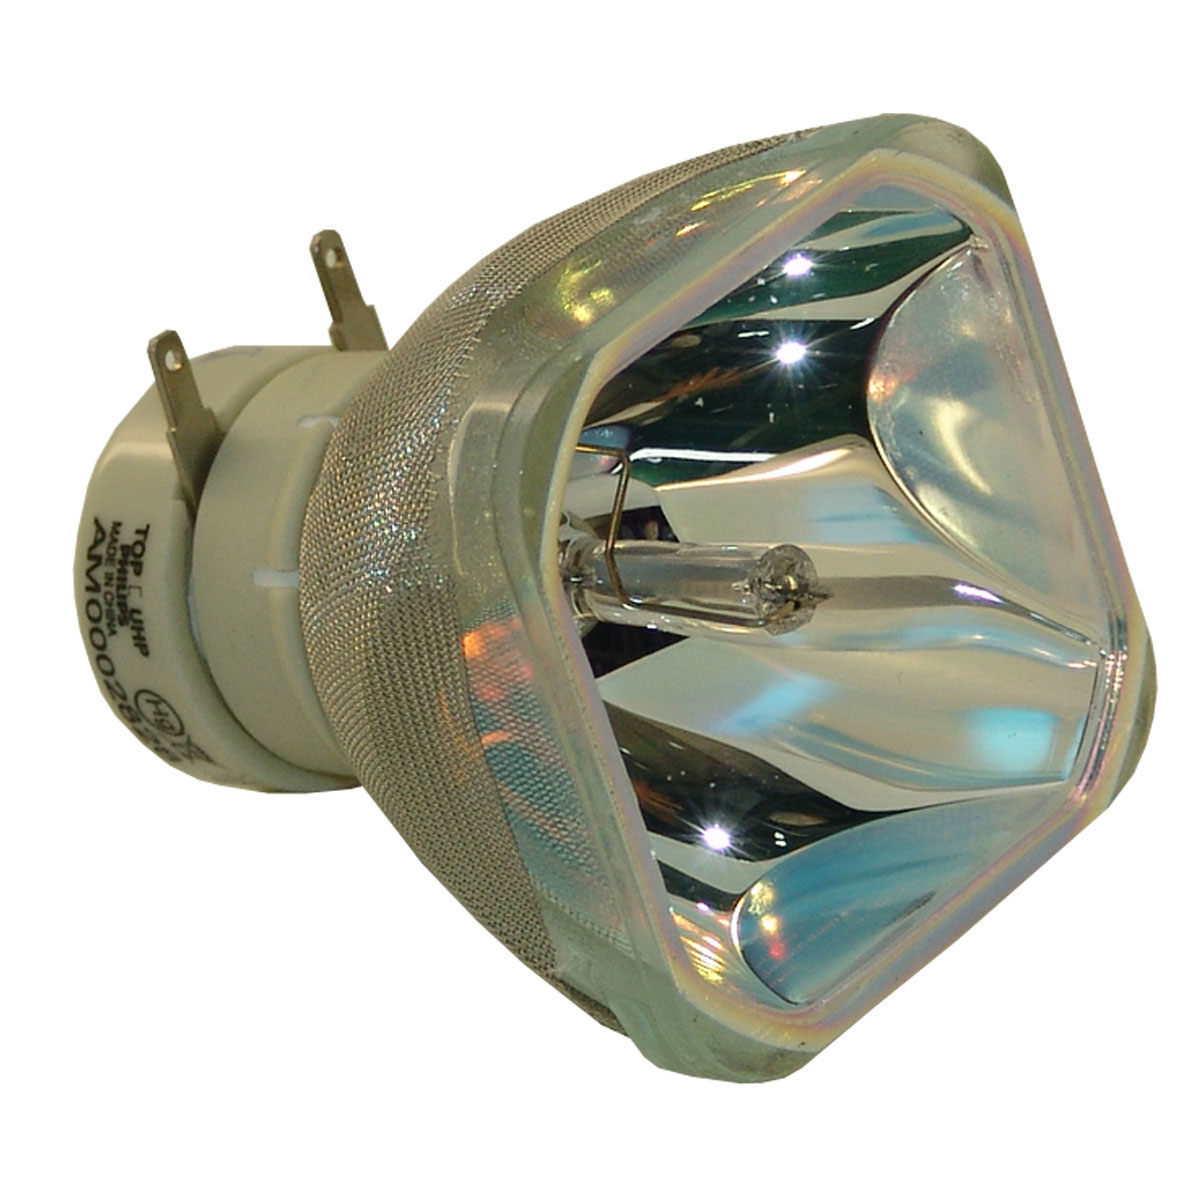 Original Philips Projector Lamp Replacement for Hitachi DT01241 (Bulb Only) - image 2 of 6